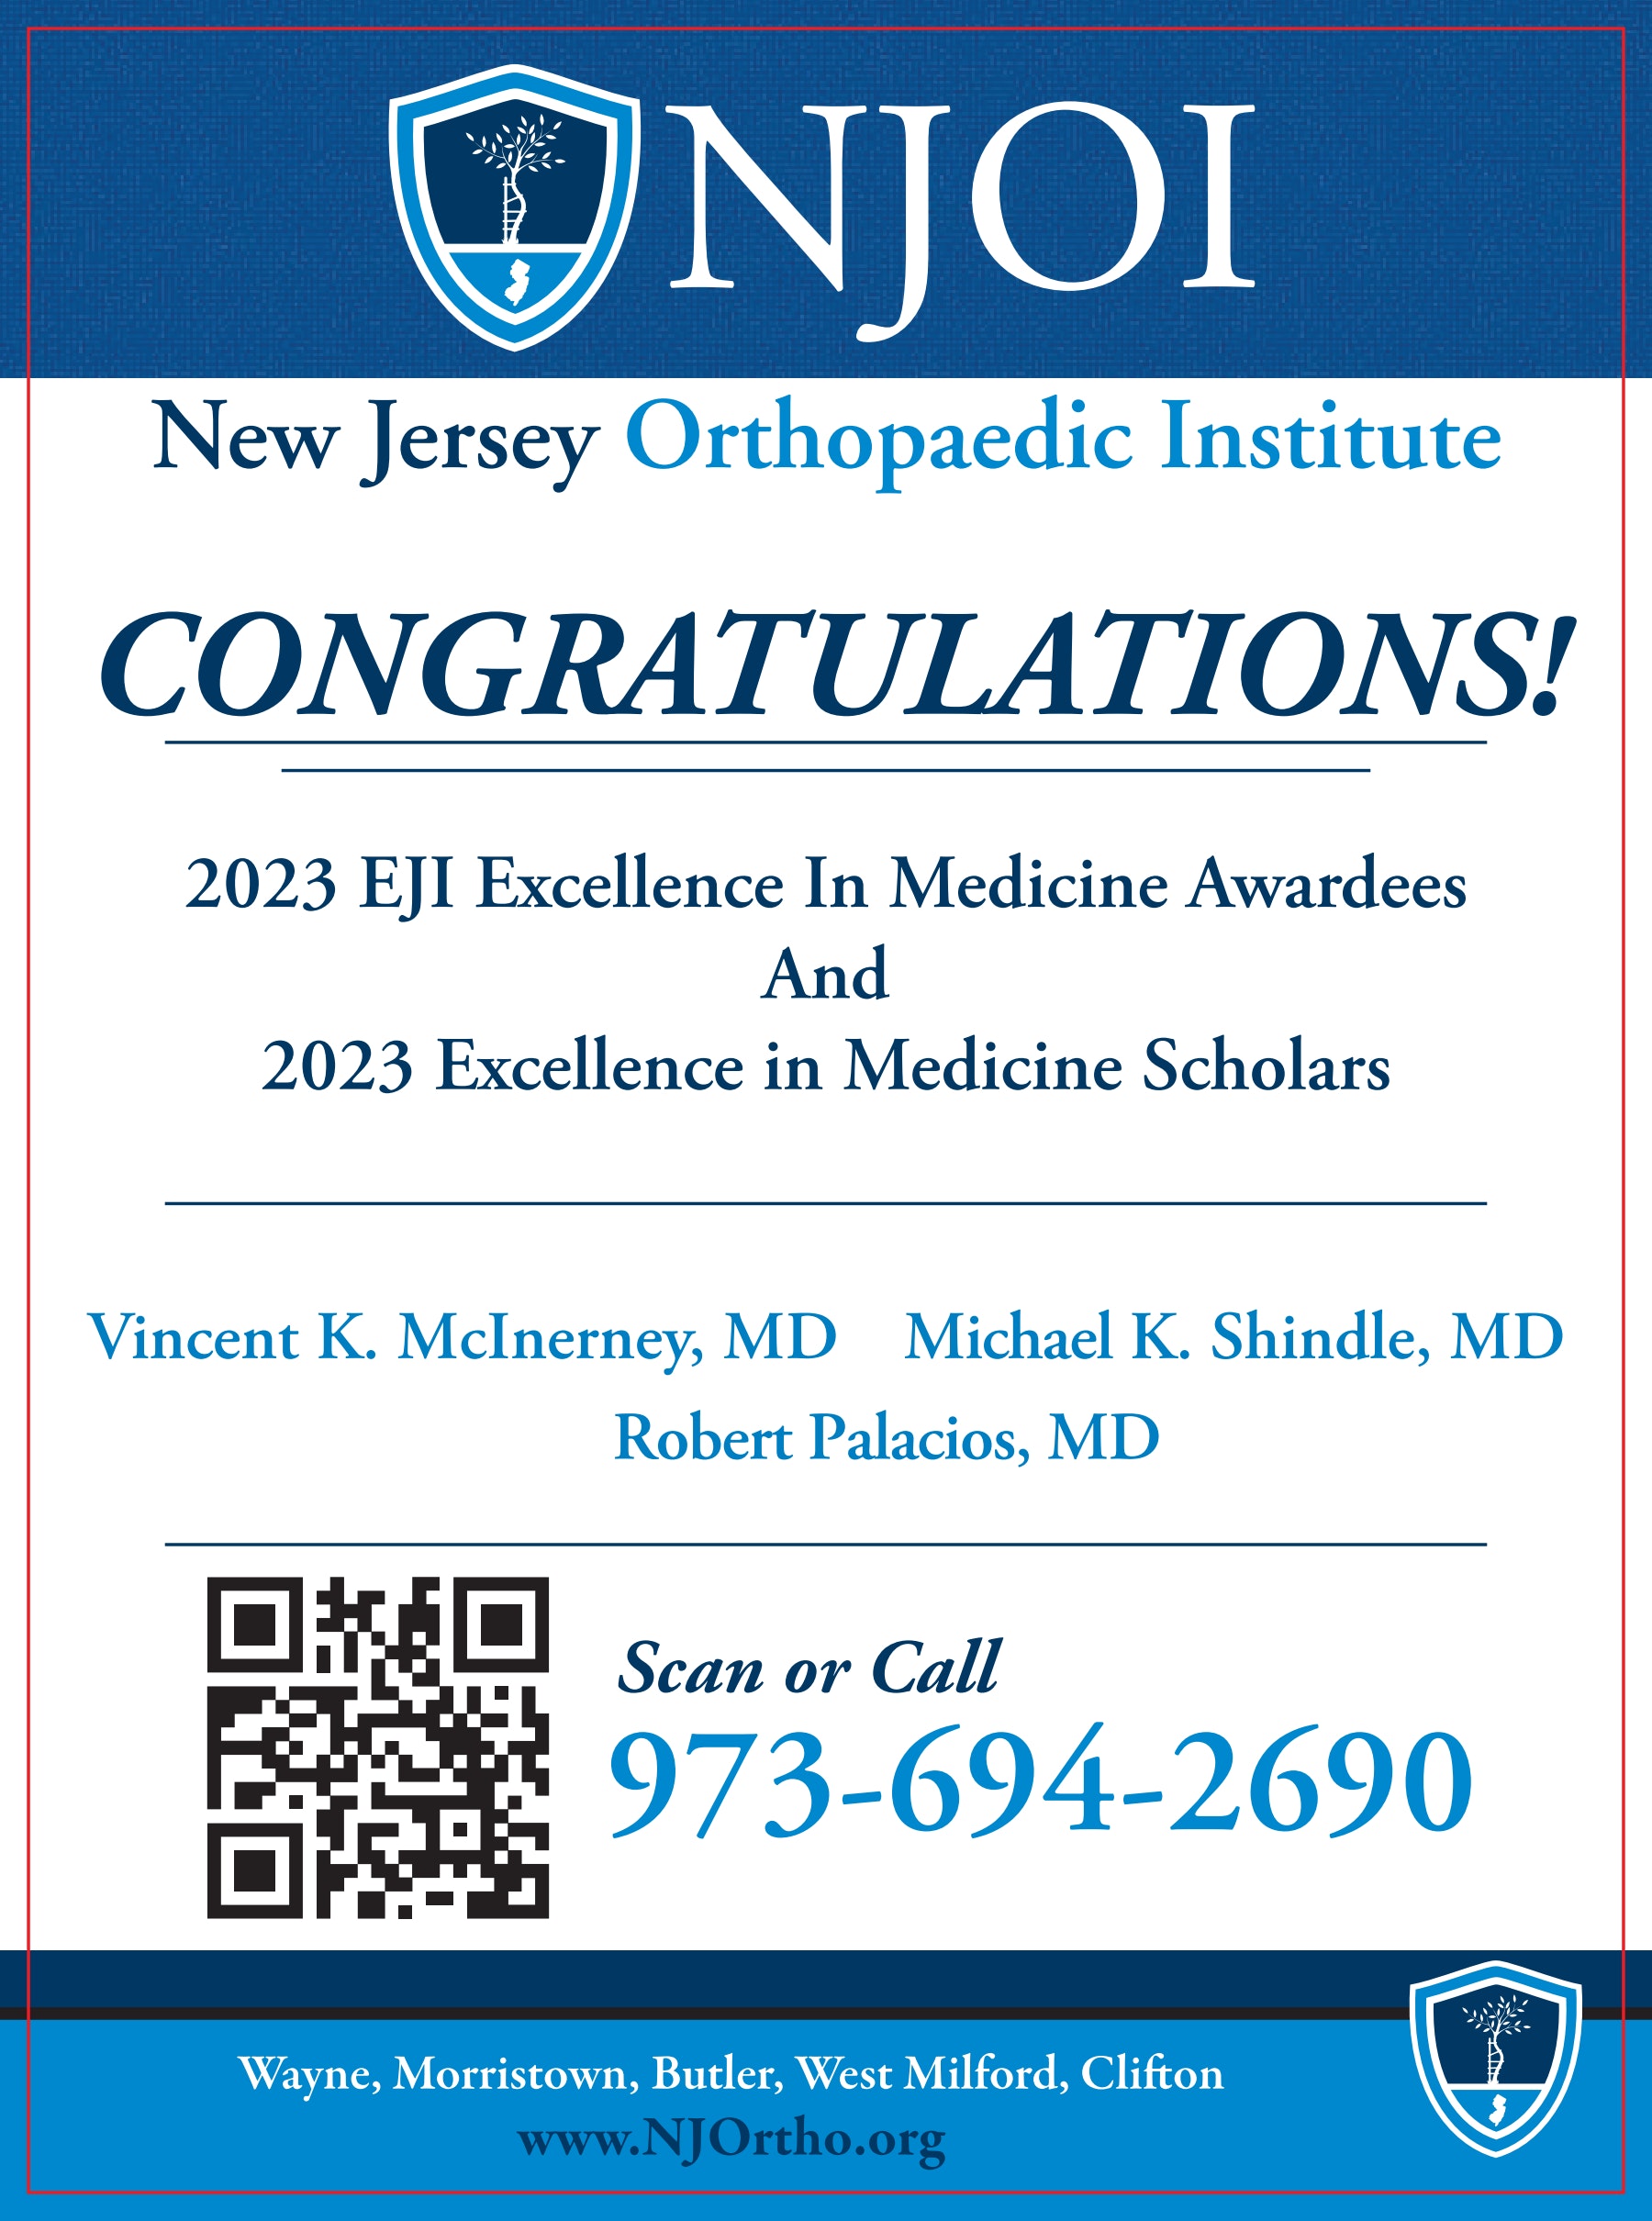 Vincent K. McInerney, MD and the New Jersey Orthopaedic Institute advertisement